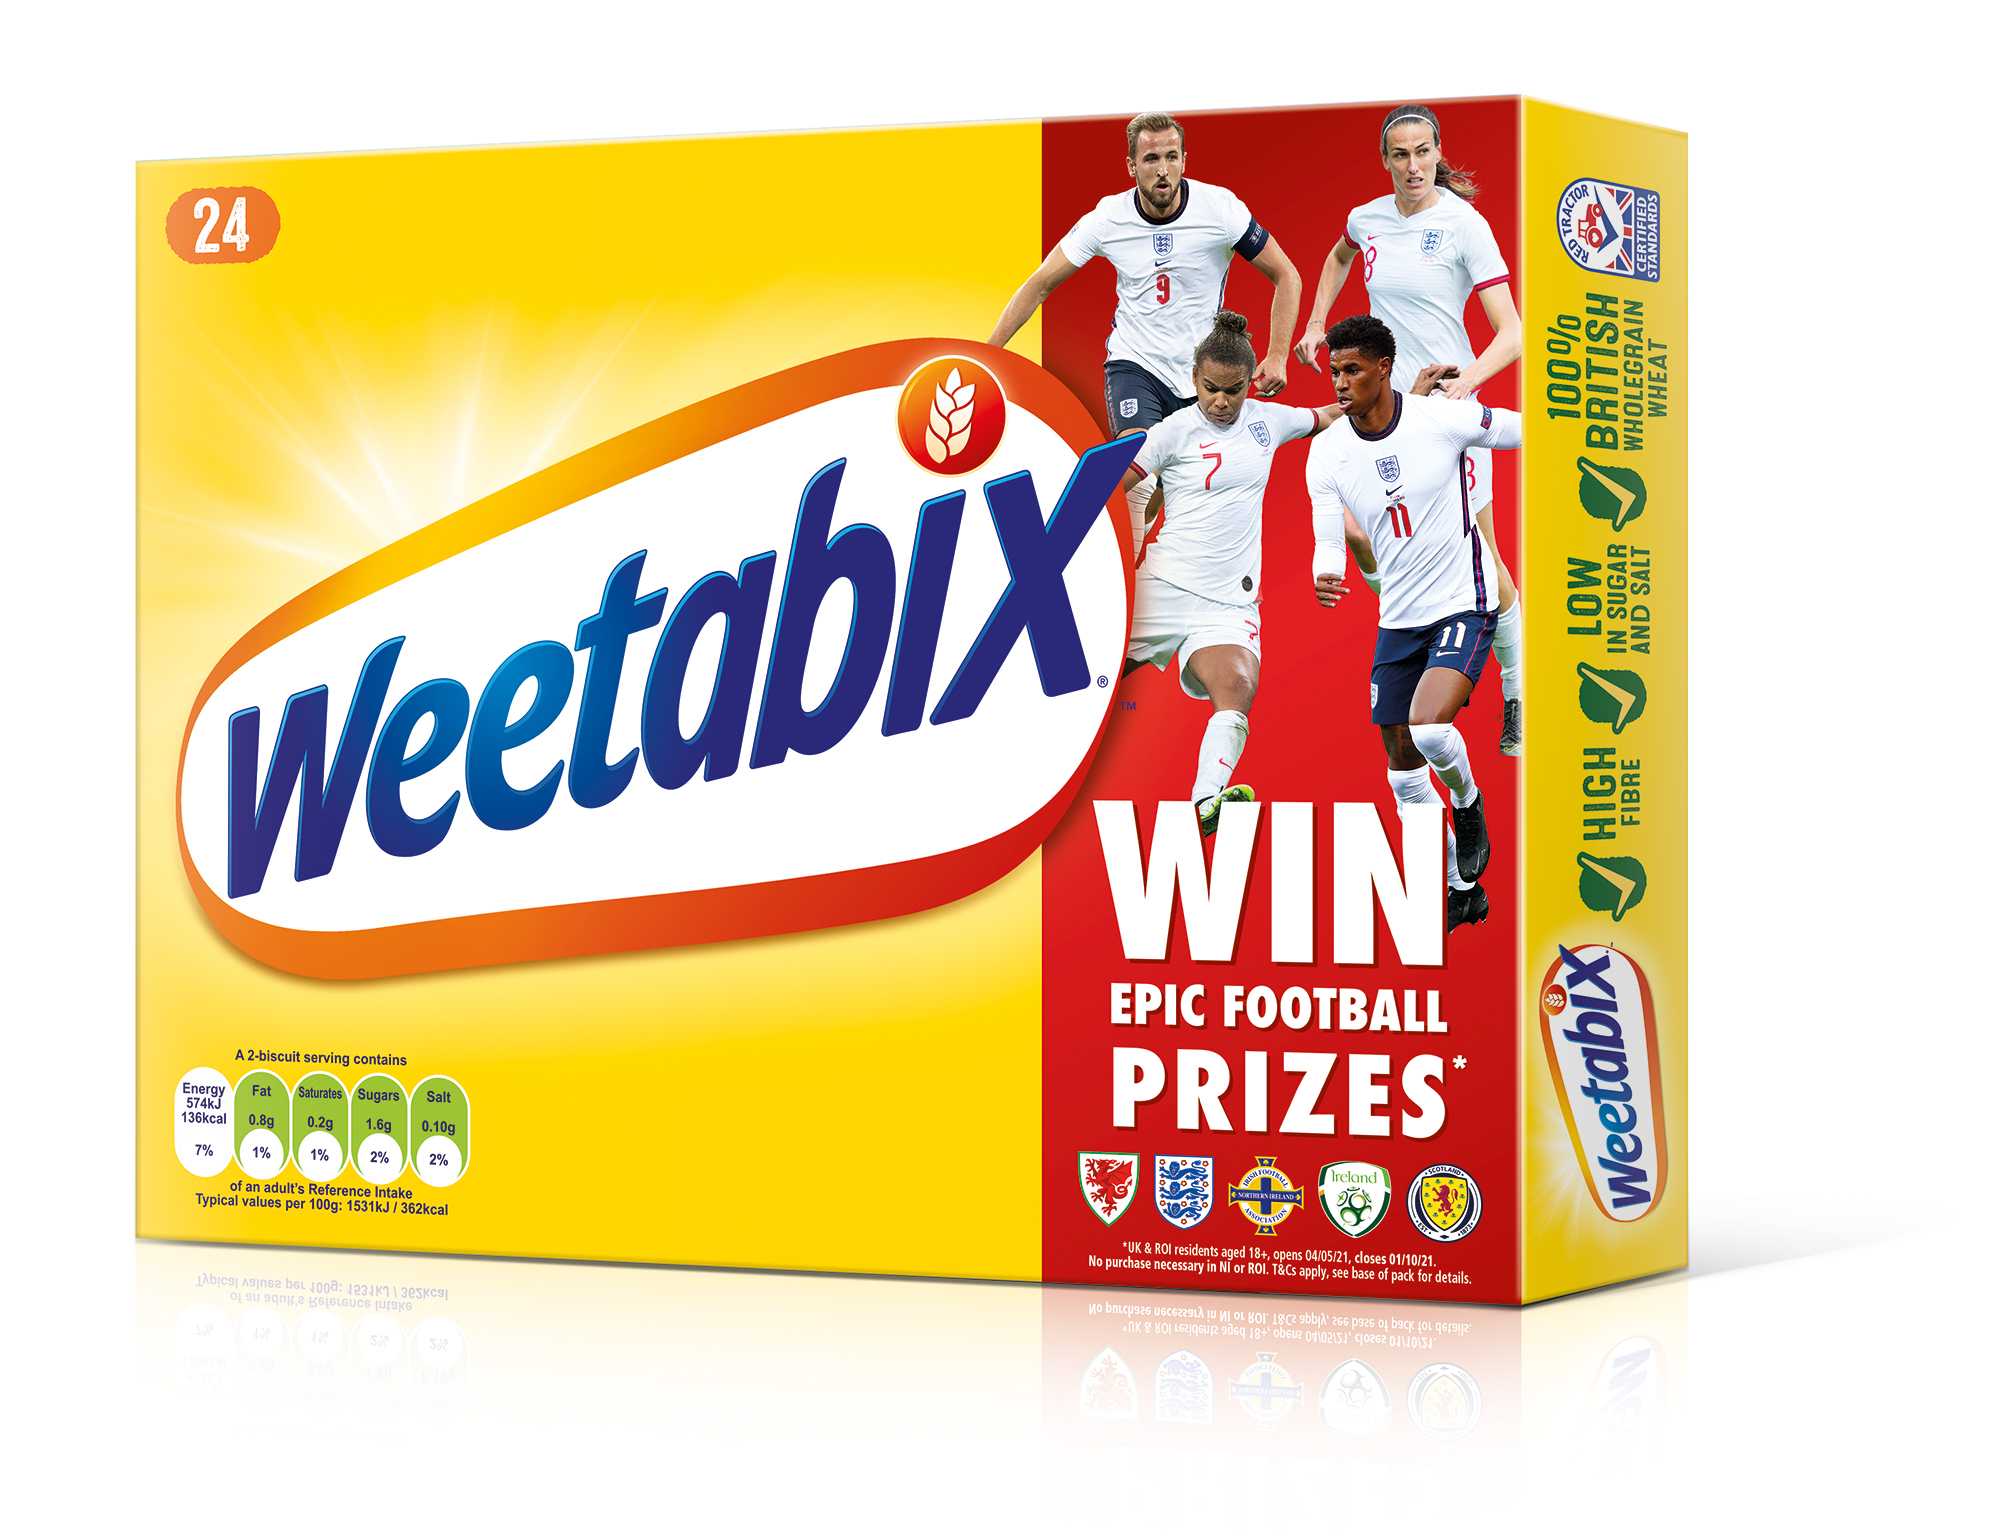 Weetabix unveils new on-pack soccer competition